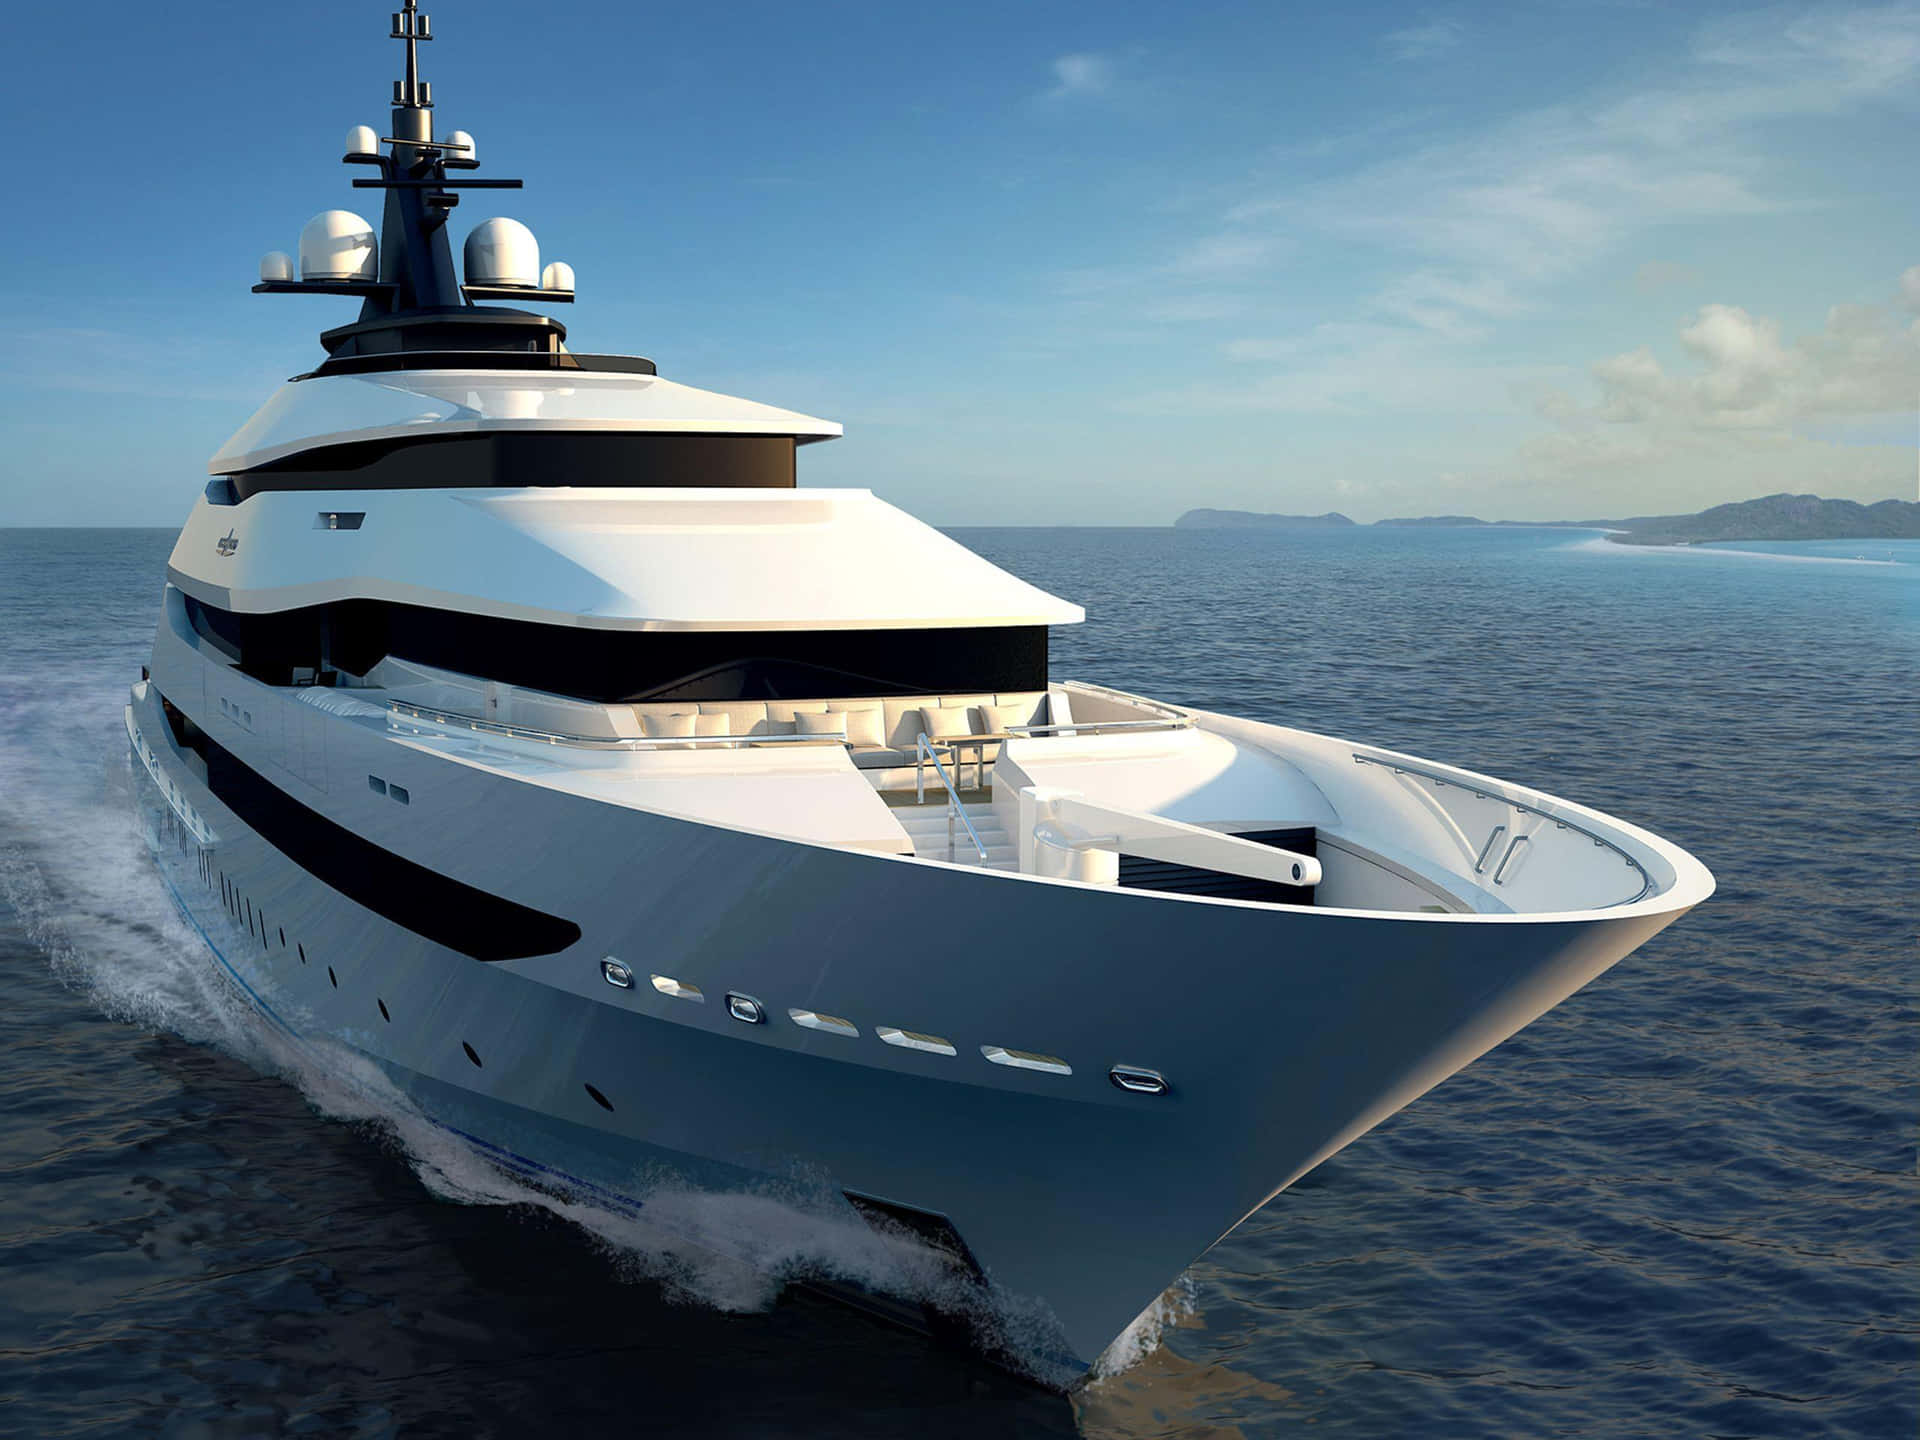 Enjoy a luxurious journey at sea on your own private yacht